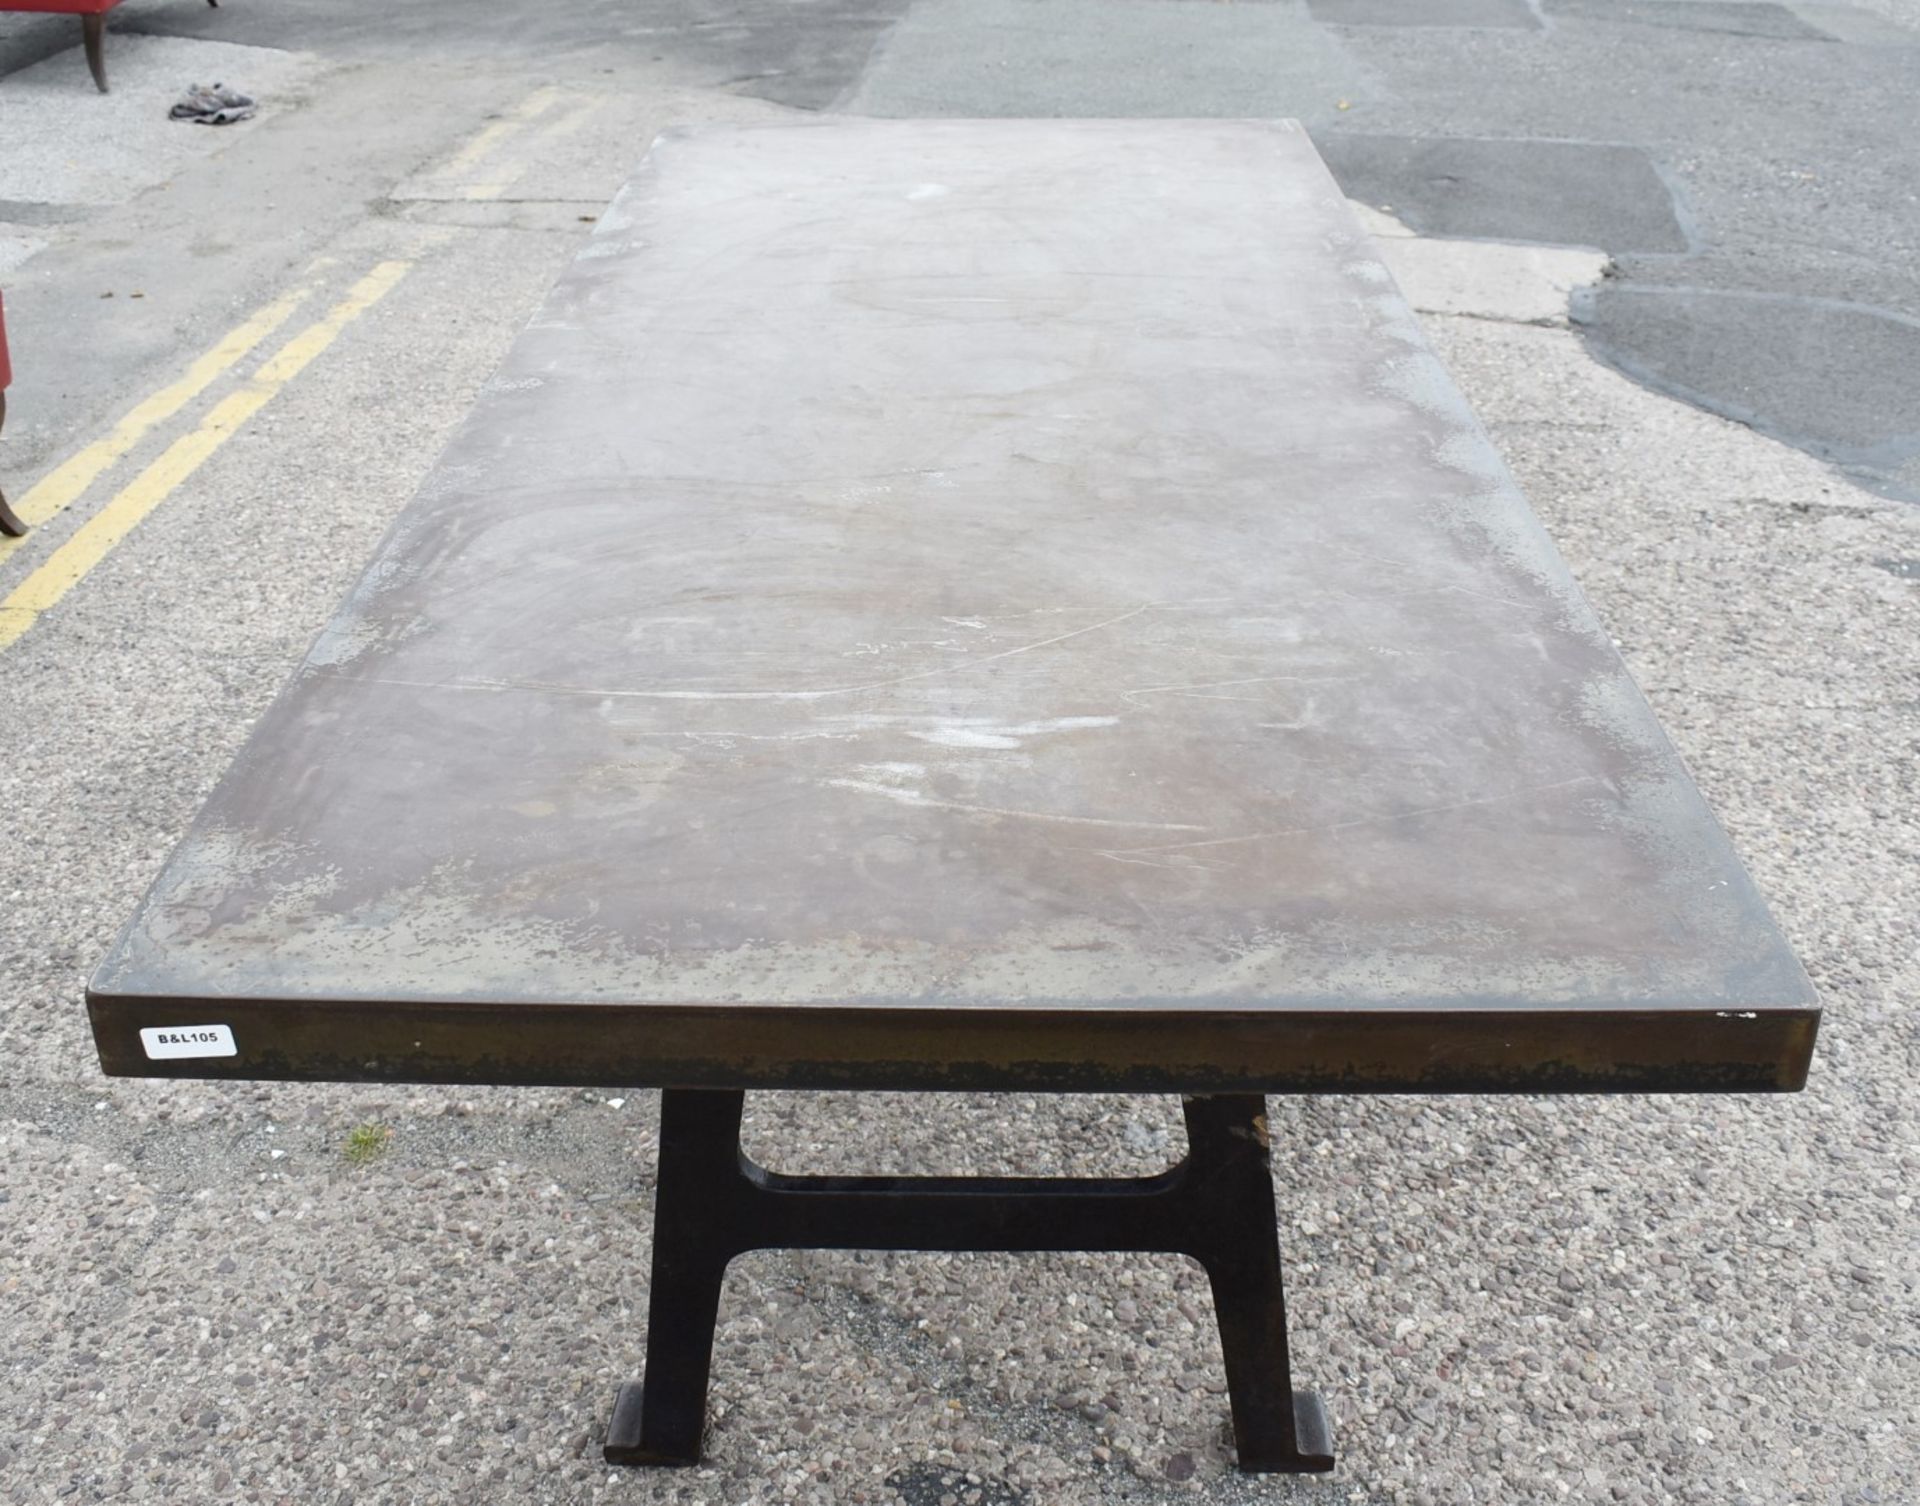 1 x Industrial Style 200cm Banquetting Restaurant Table Featuring a Heavy Steel Top & Steel Legs - Image 11 of 23